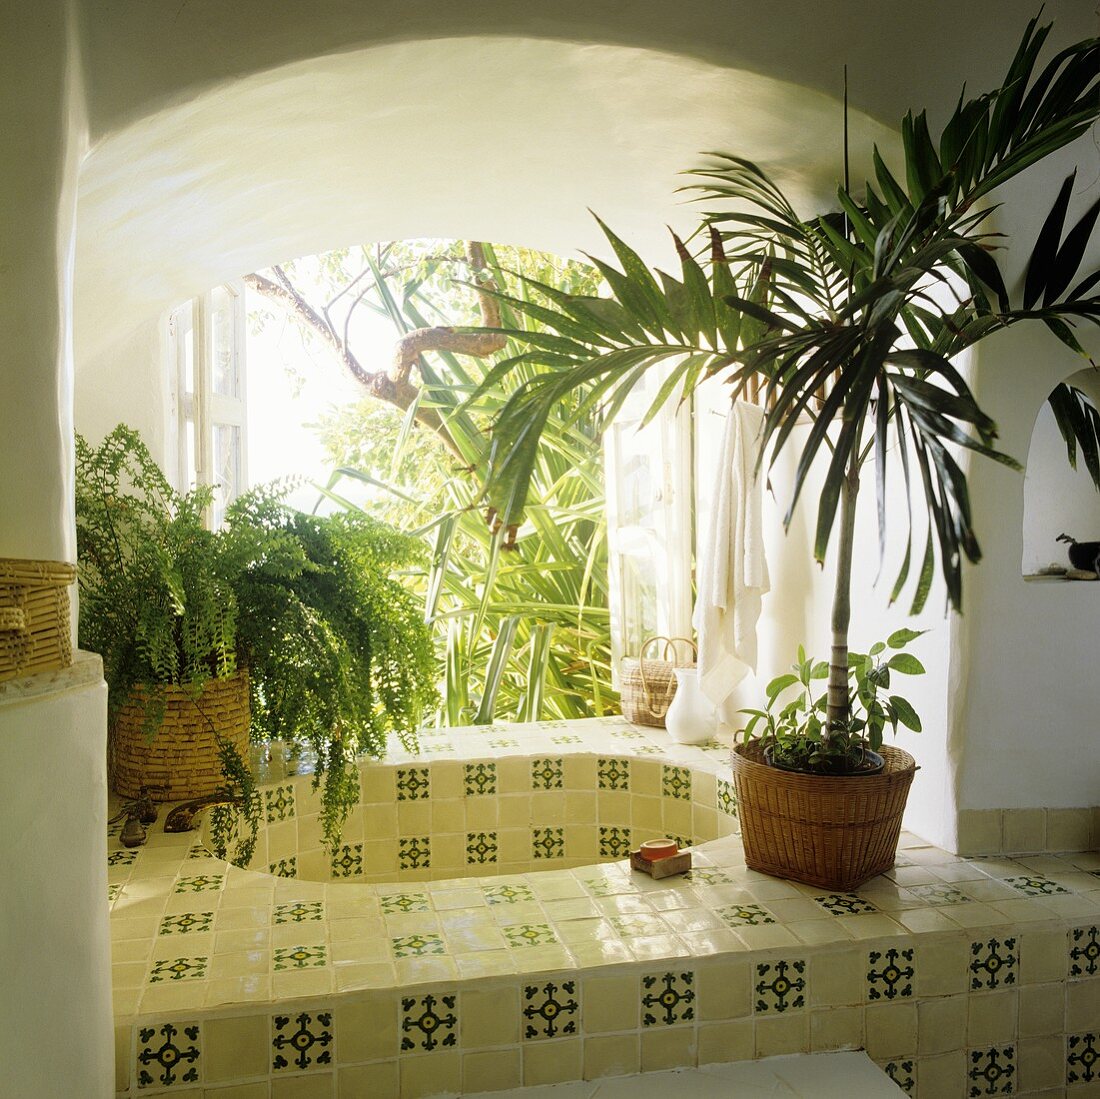 A tiled sink in a arched wall niche with a window and view of the garden